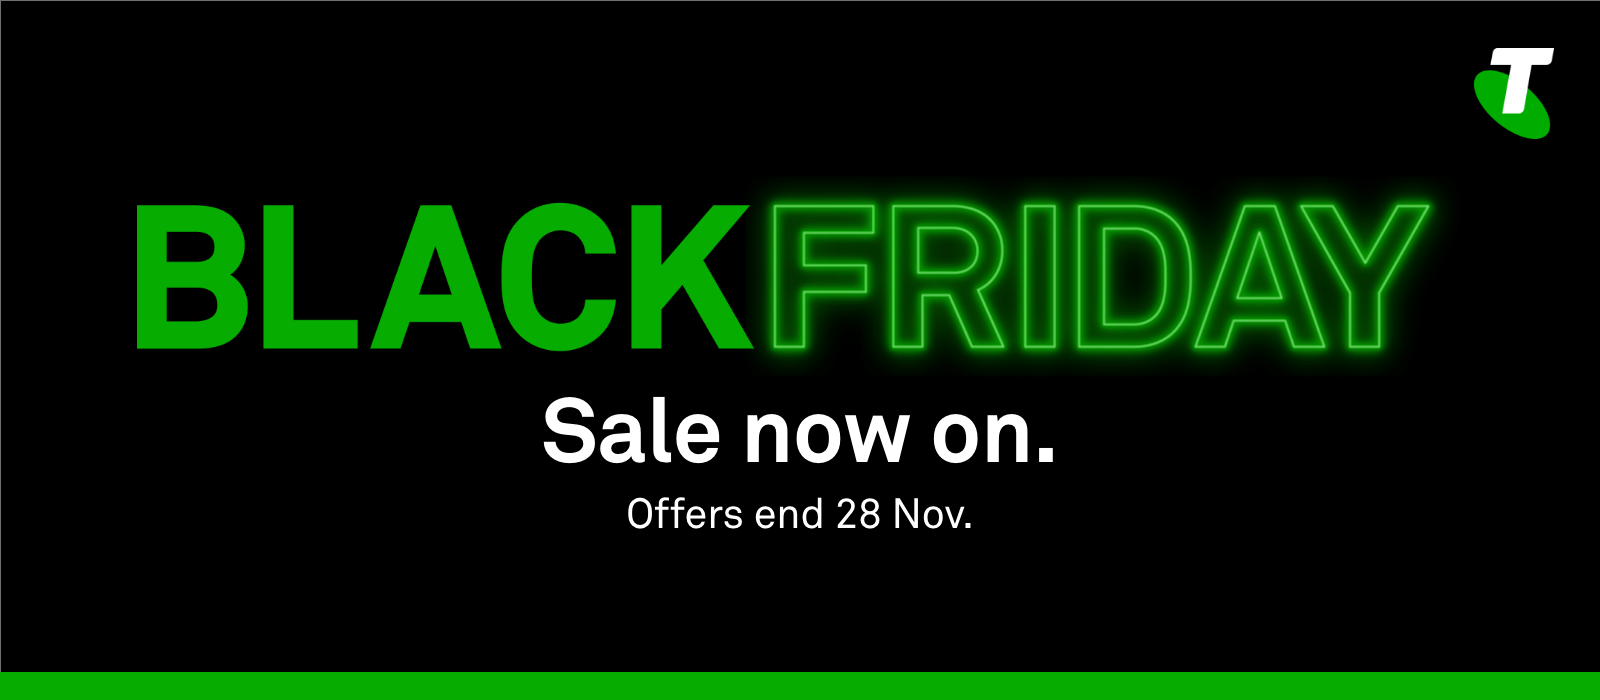 Telstra Black Friday - 50% OFF Google Nest, Up to $600 RRP mobile phones, 50% OFF Telstra TV